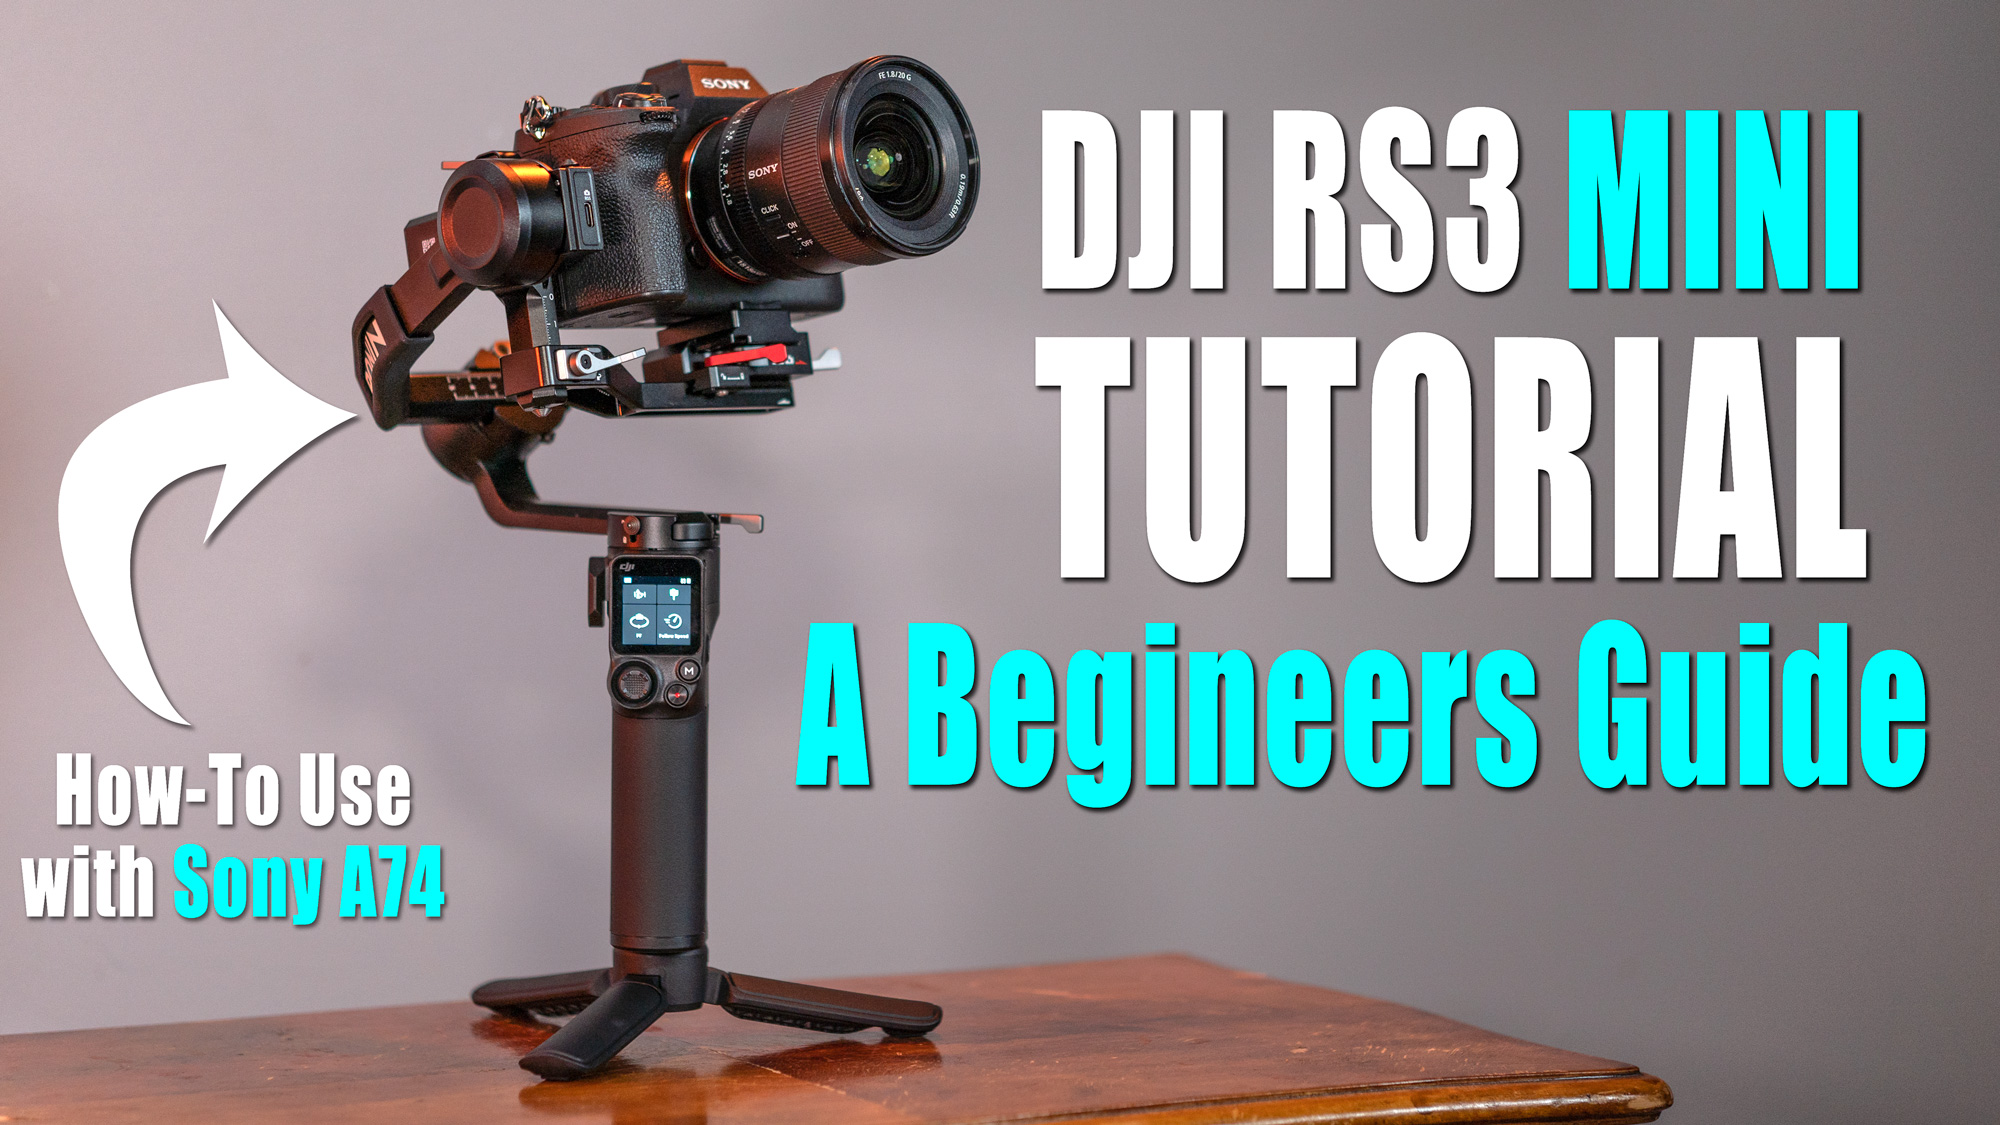 DJI RS3 MINI Tutorial – A Beginners Guide & How-To Use w/ Sony A74